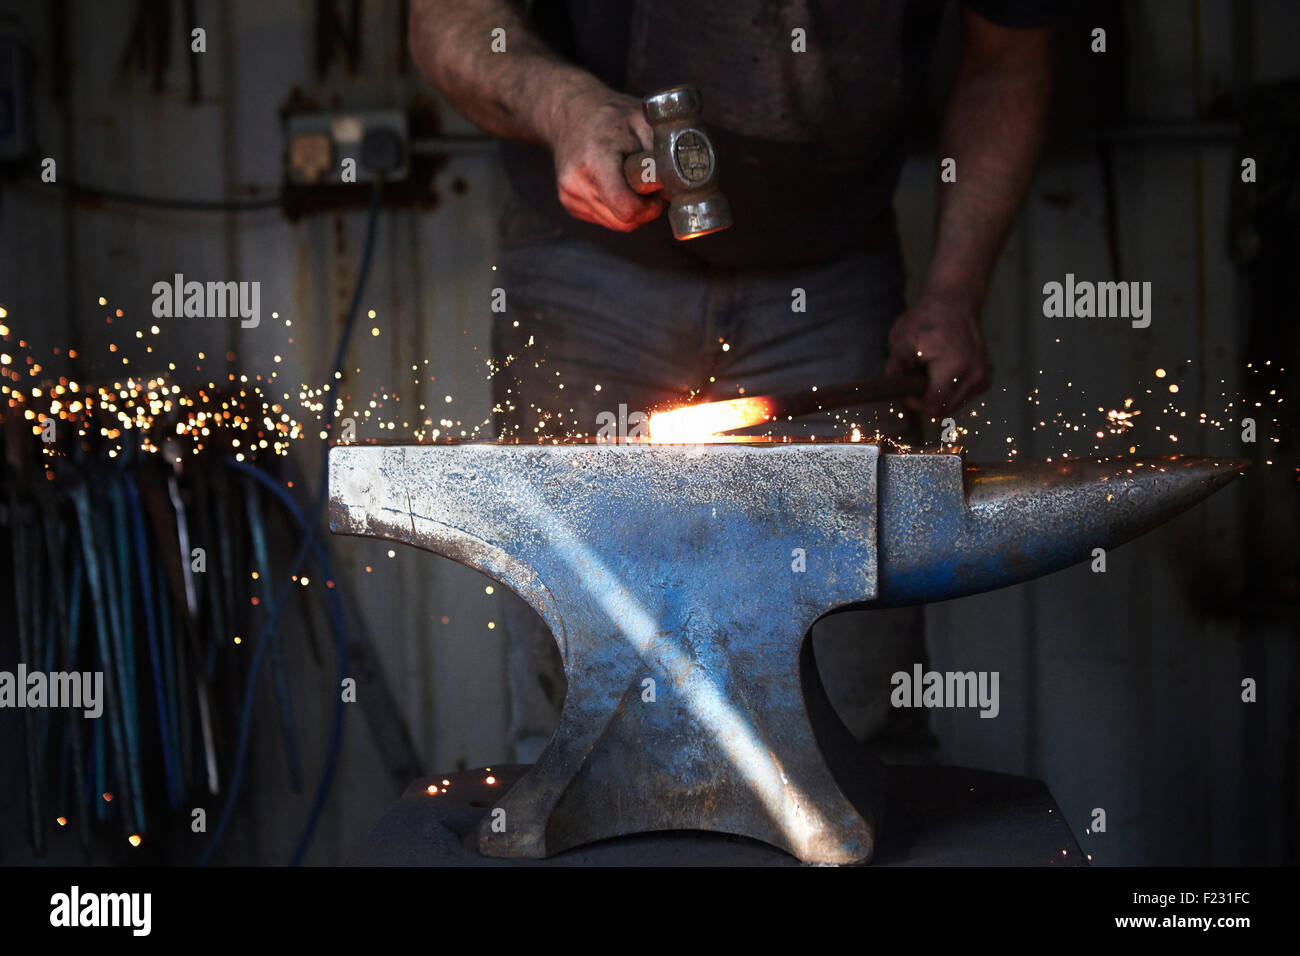 A blacksmith shaping a hot piece of iron on an anvil with a hammer, with sparks flying. Stock Photo